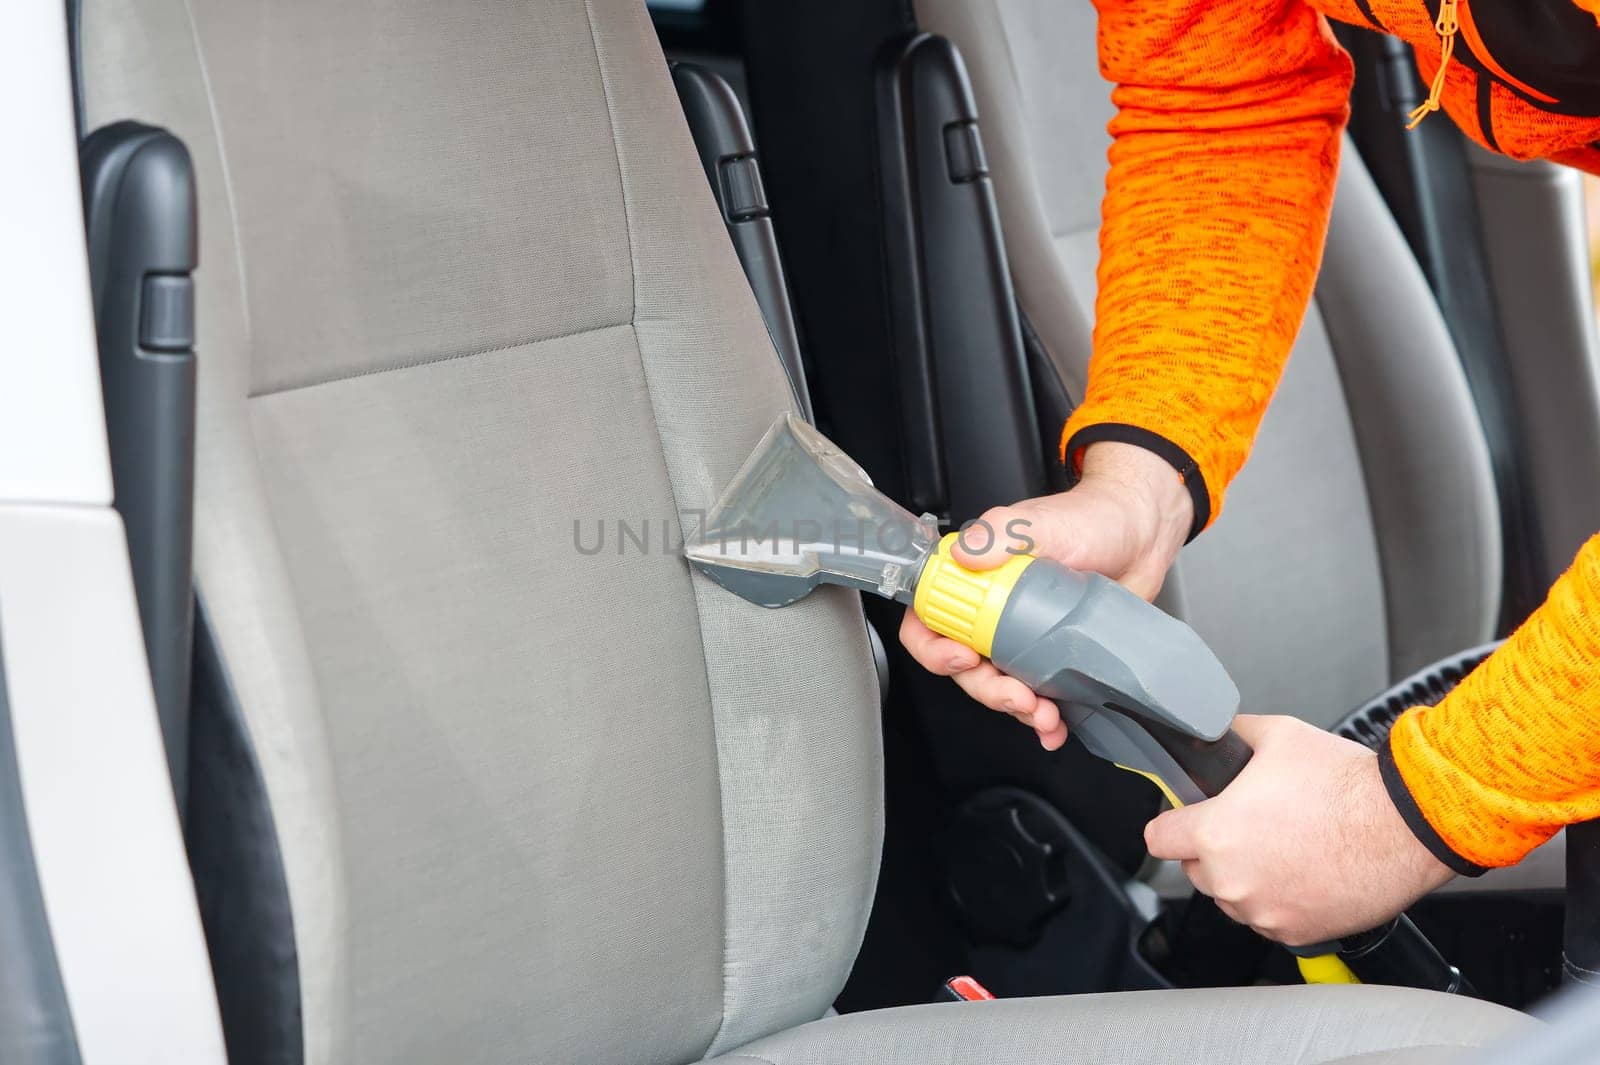 Handyman vacuuming car front textile seat with vacuum cleaner. man cleaning work Minivan.